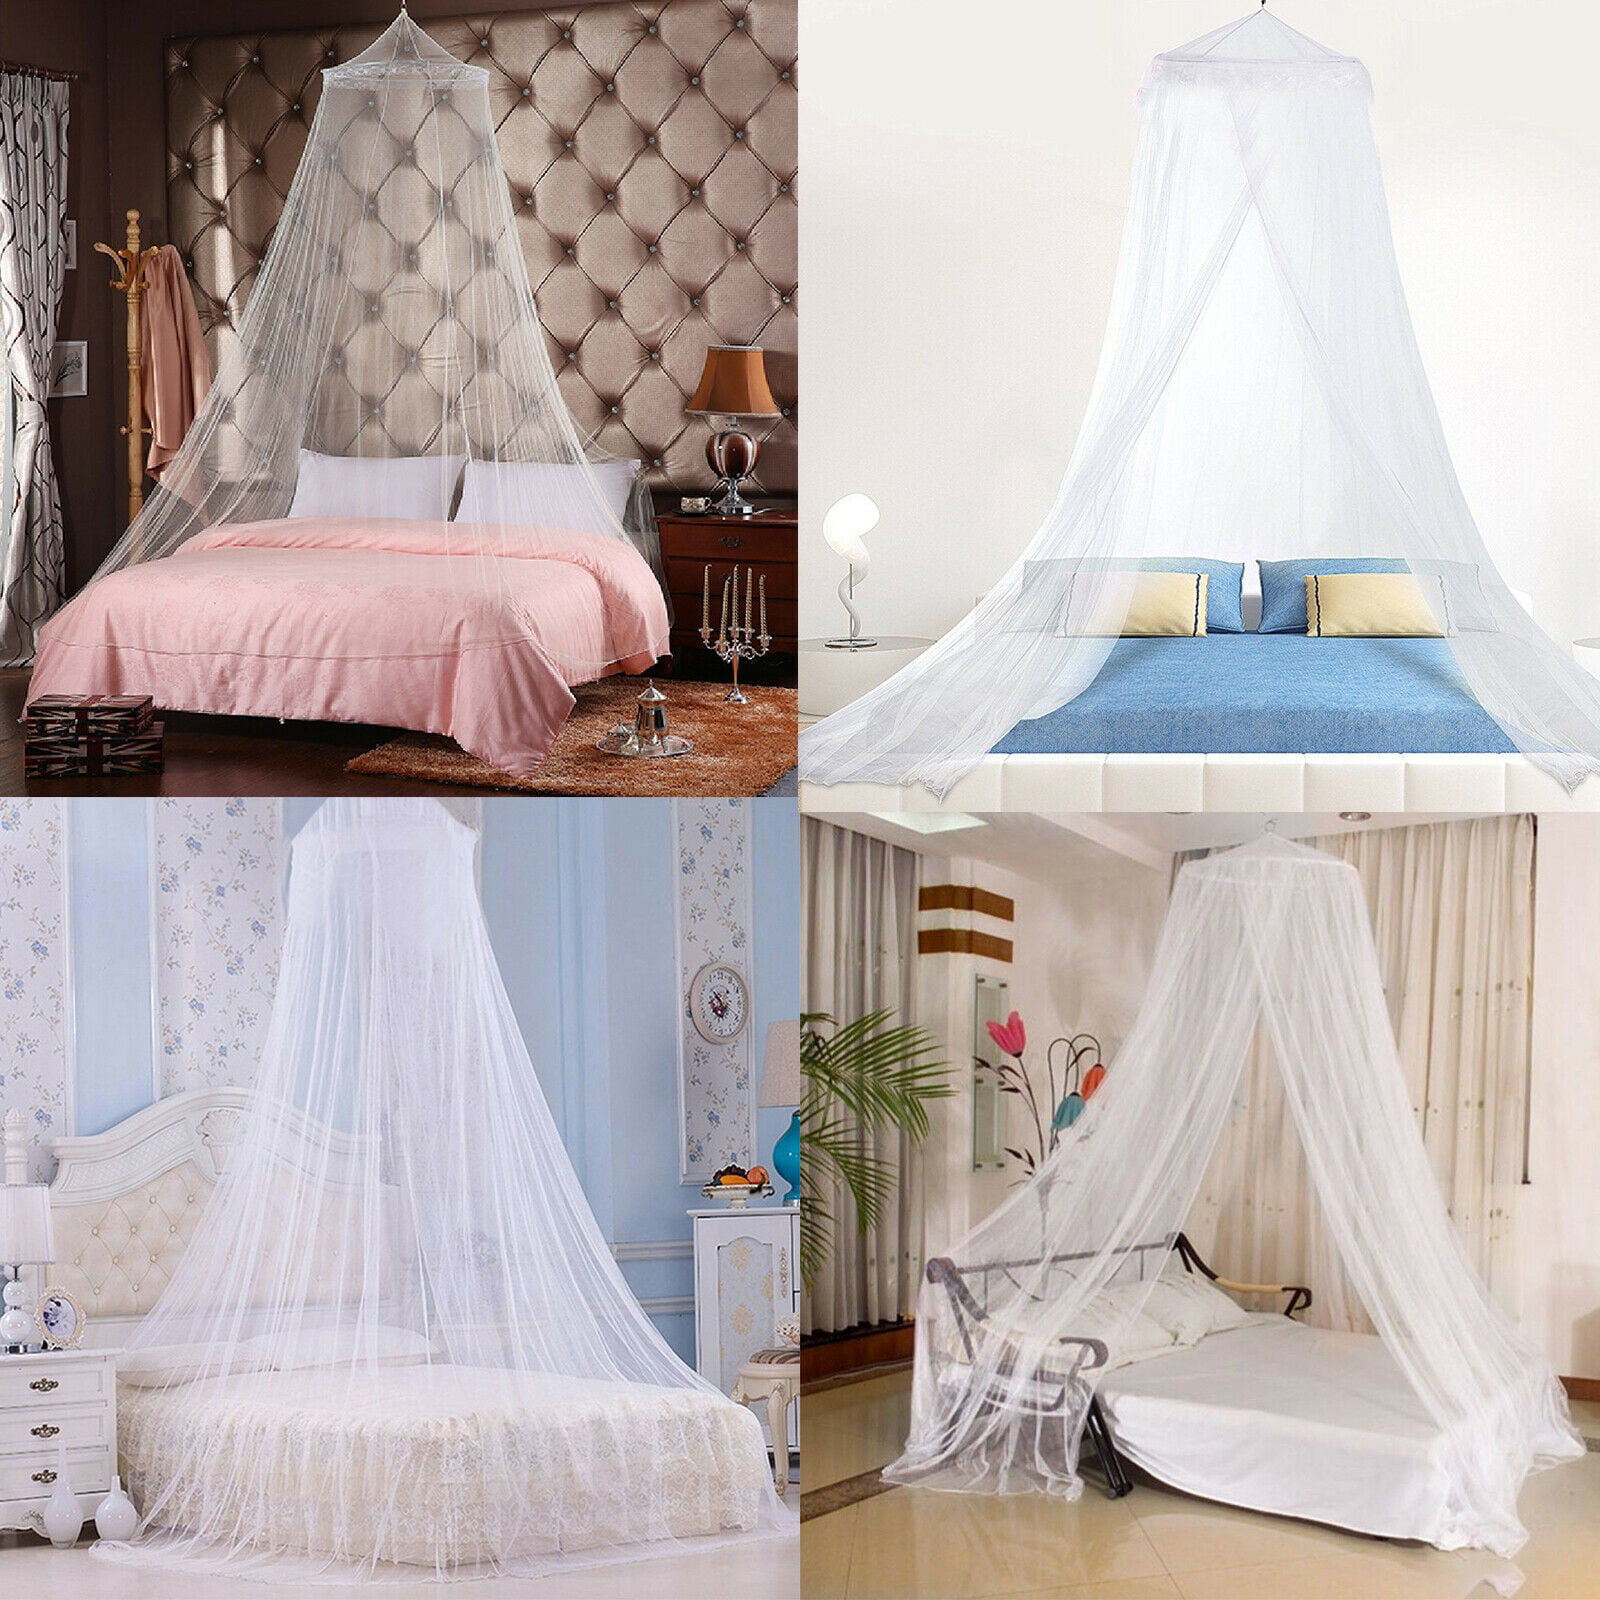 Costway 4 Corner Post Bed Canopy Mosquito Net Bedding Full Queen King Size White 